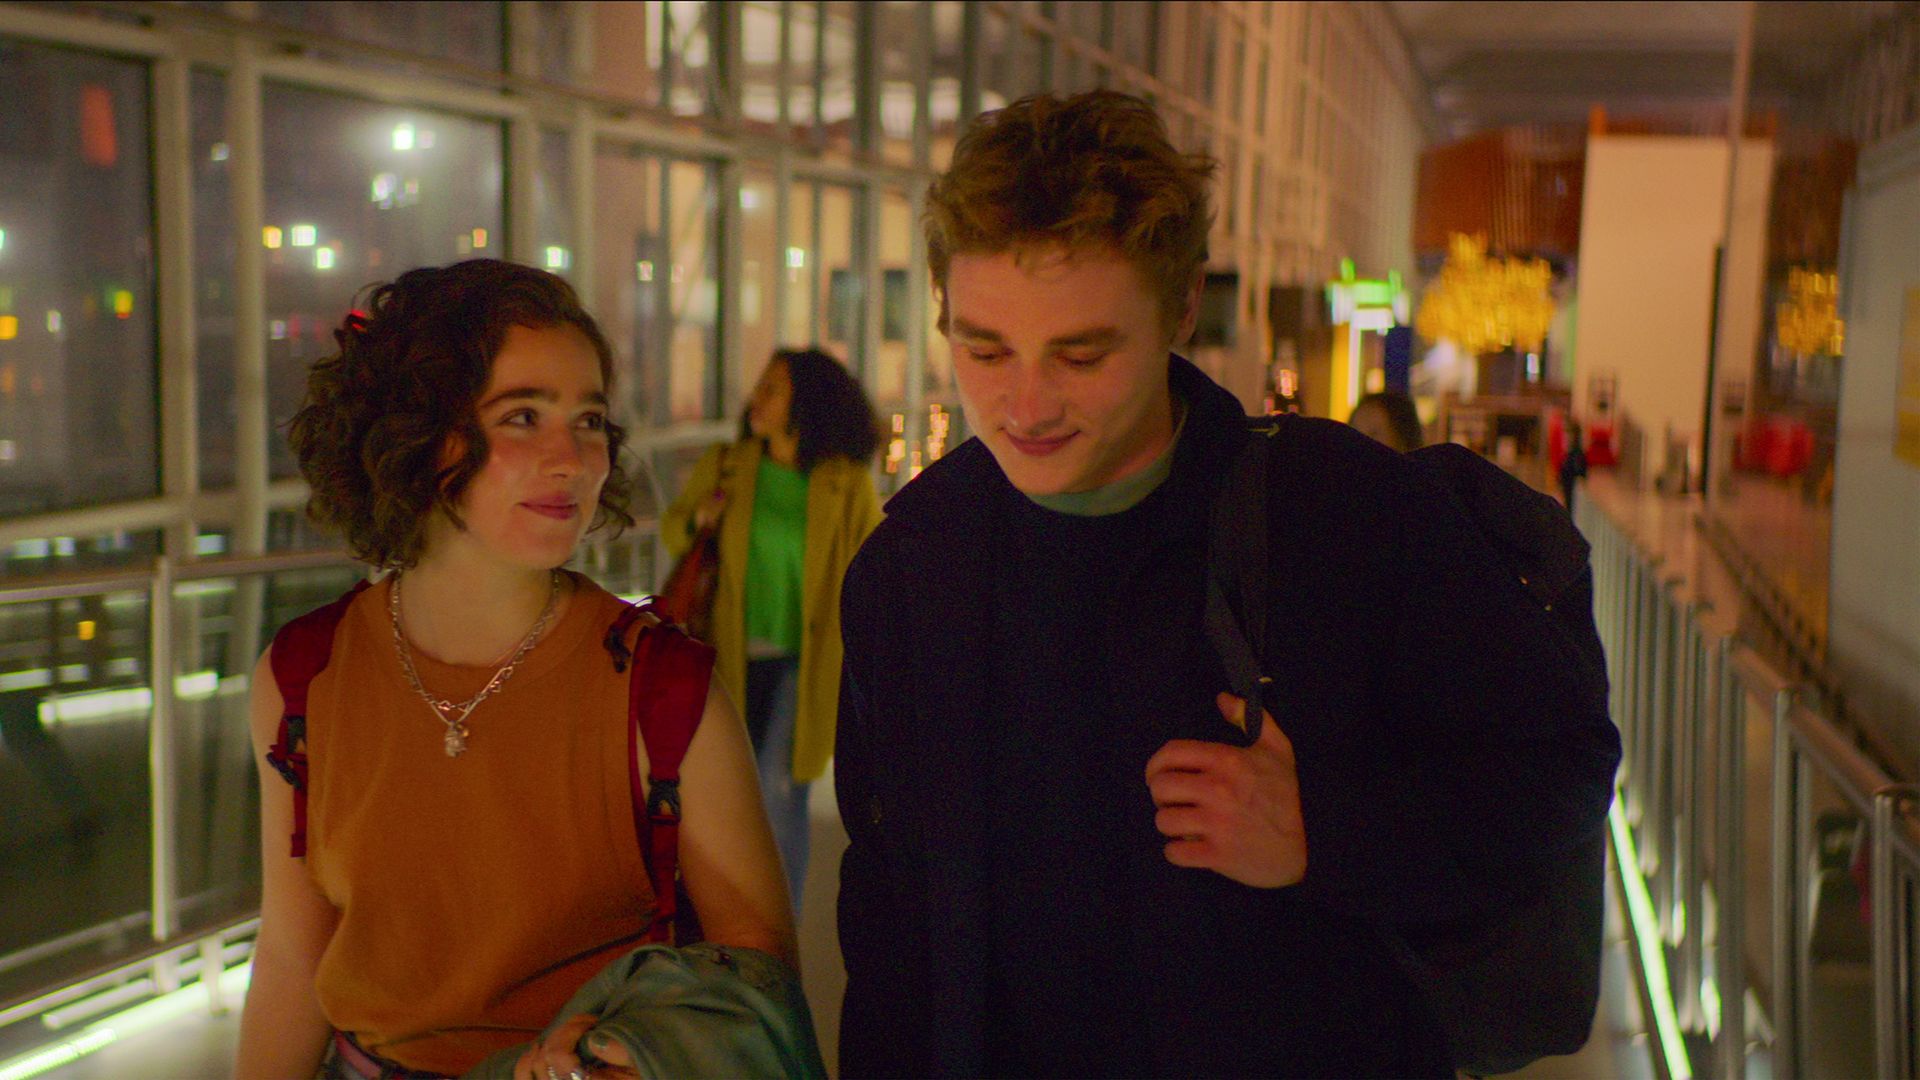 Haley Lu Richardson as Hadley Sullivan and Ben Hardy as Oliver Jones  in Love at First Sight